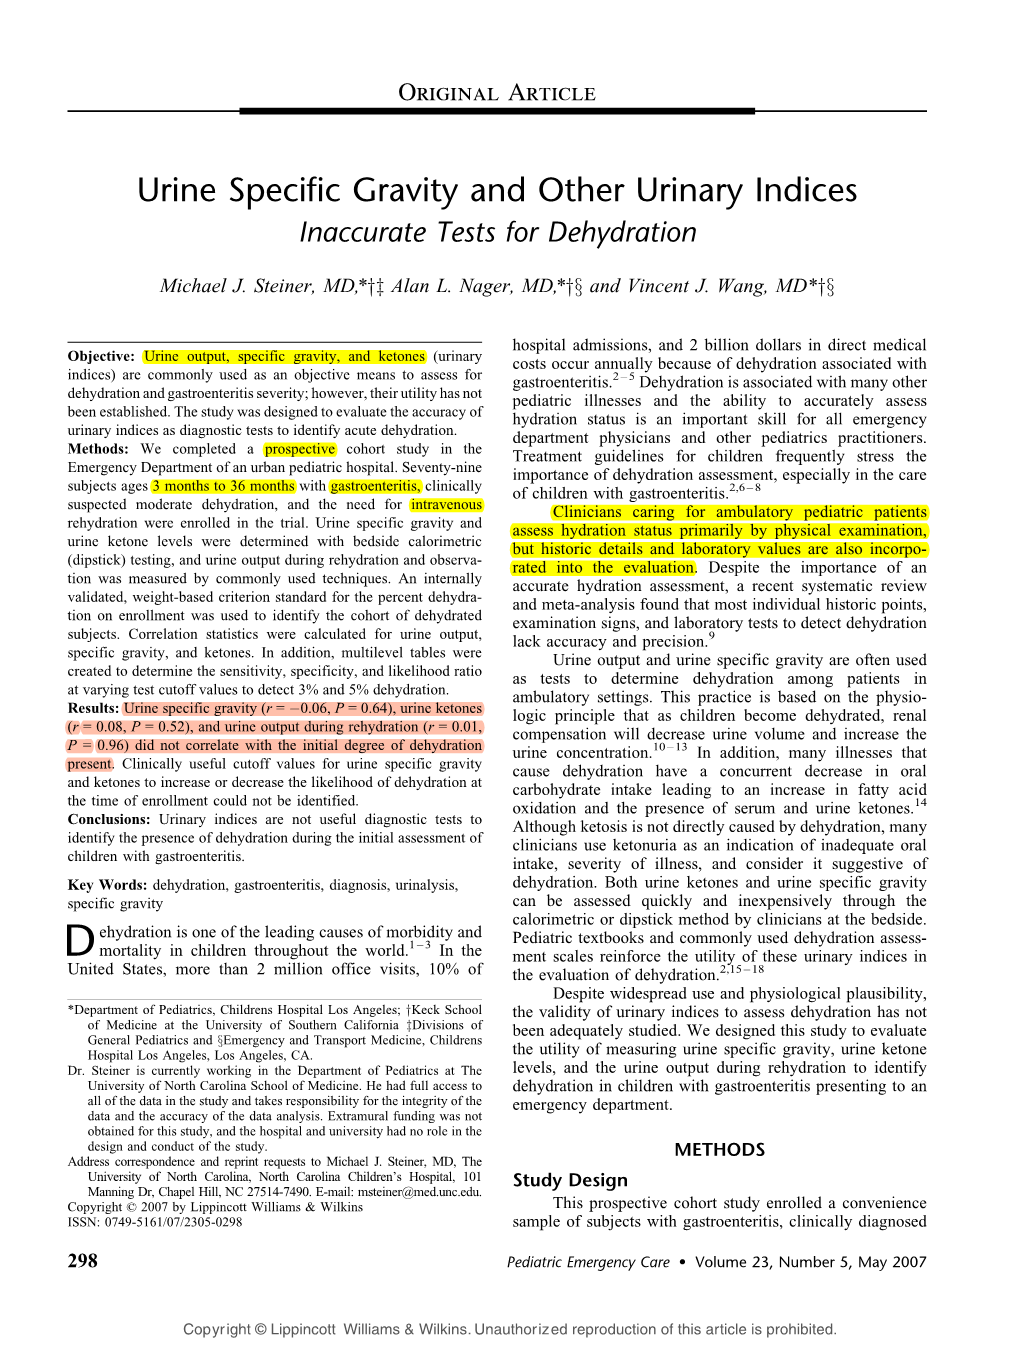 Urine Specific Gravity and Other Urinary Indices Inaccurate Tests for Dehydration